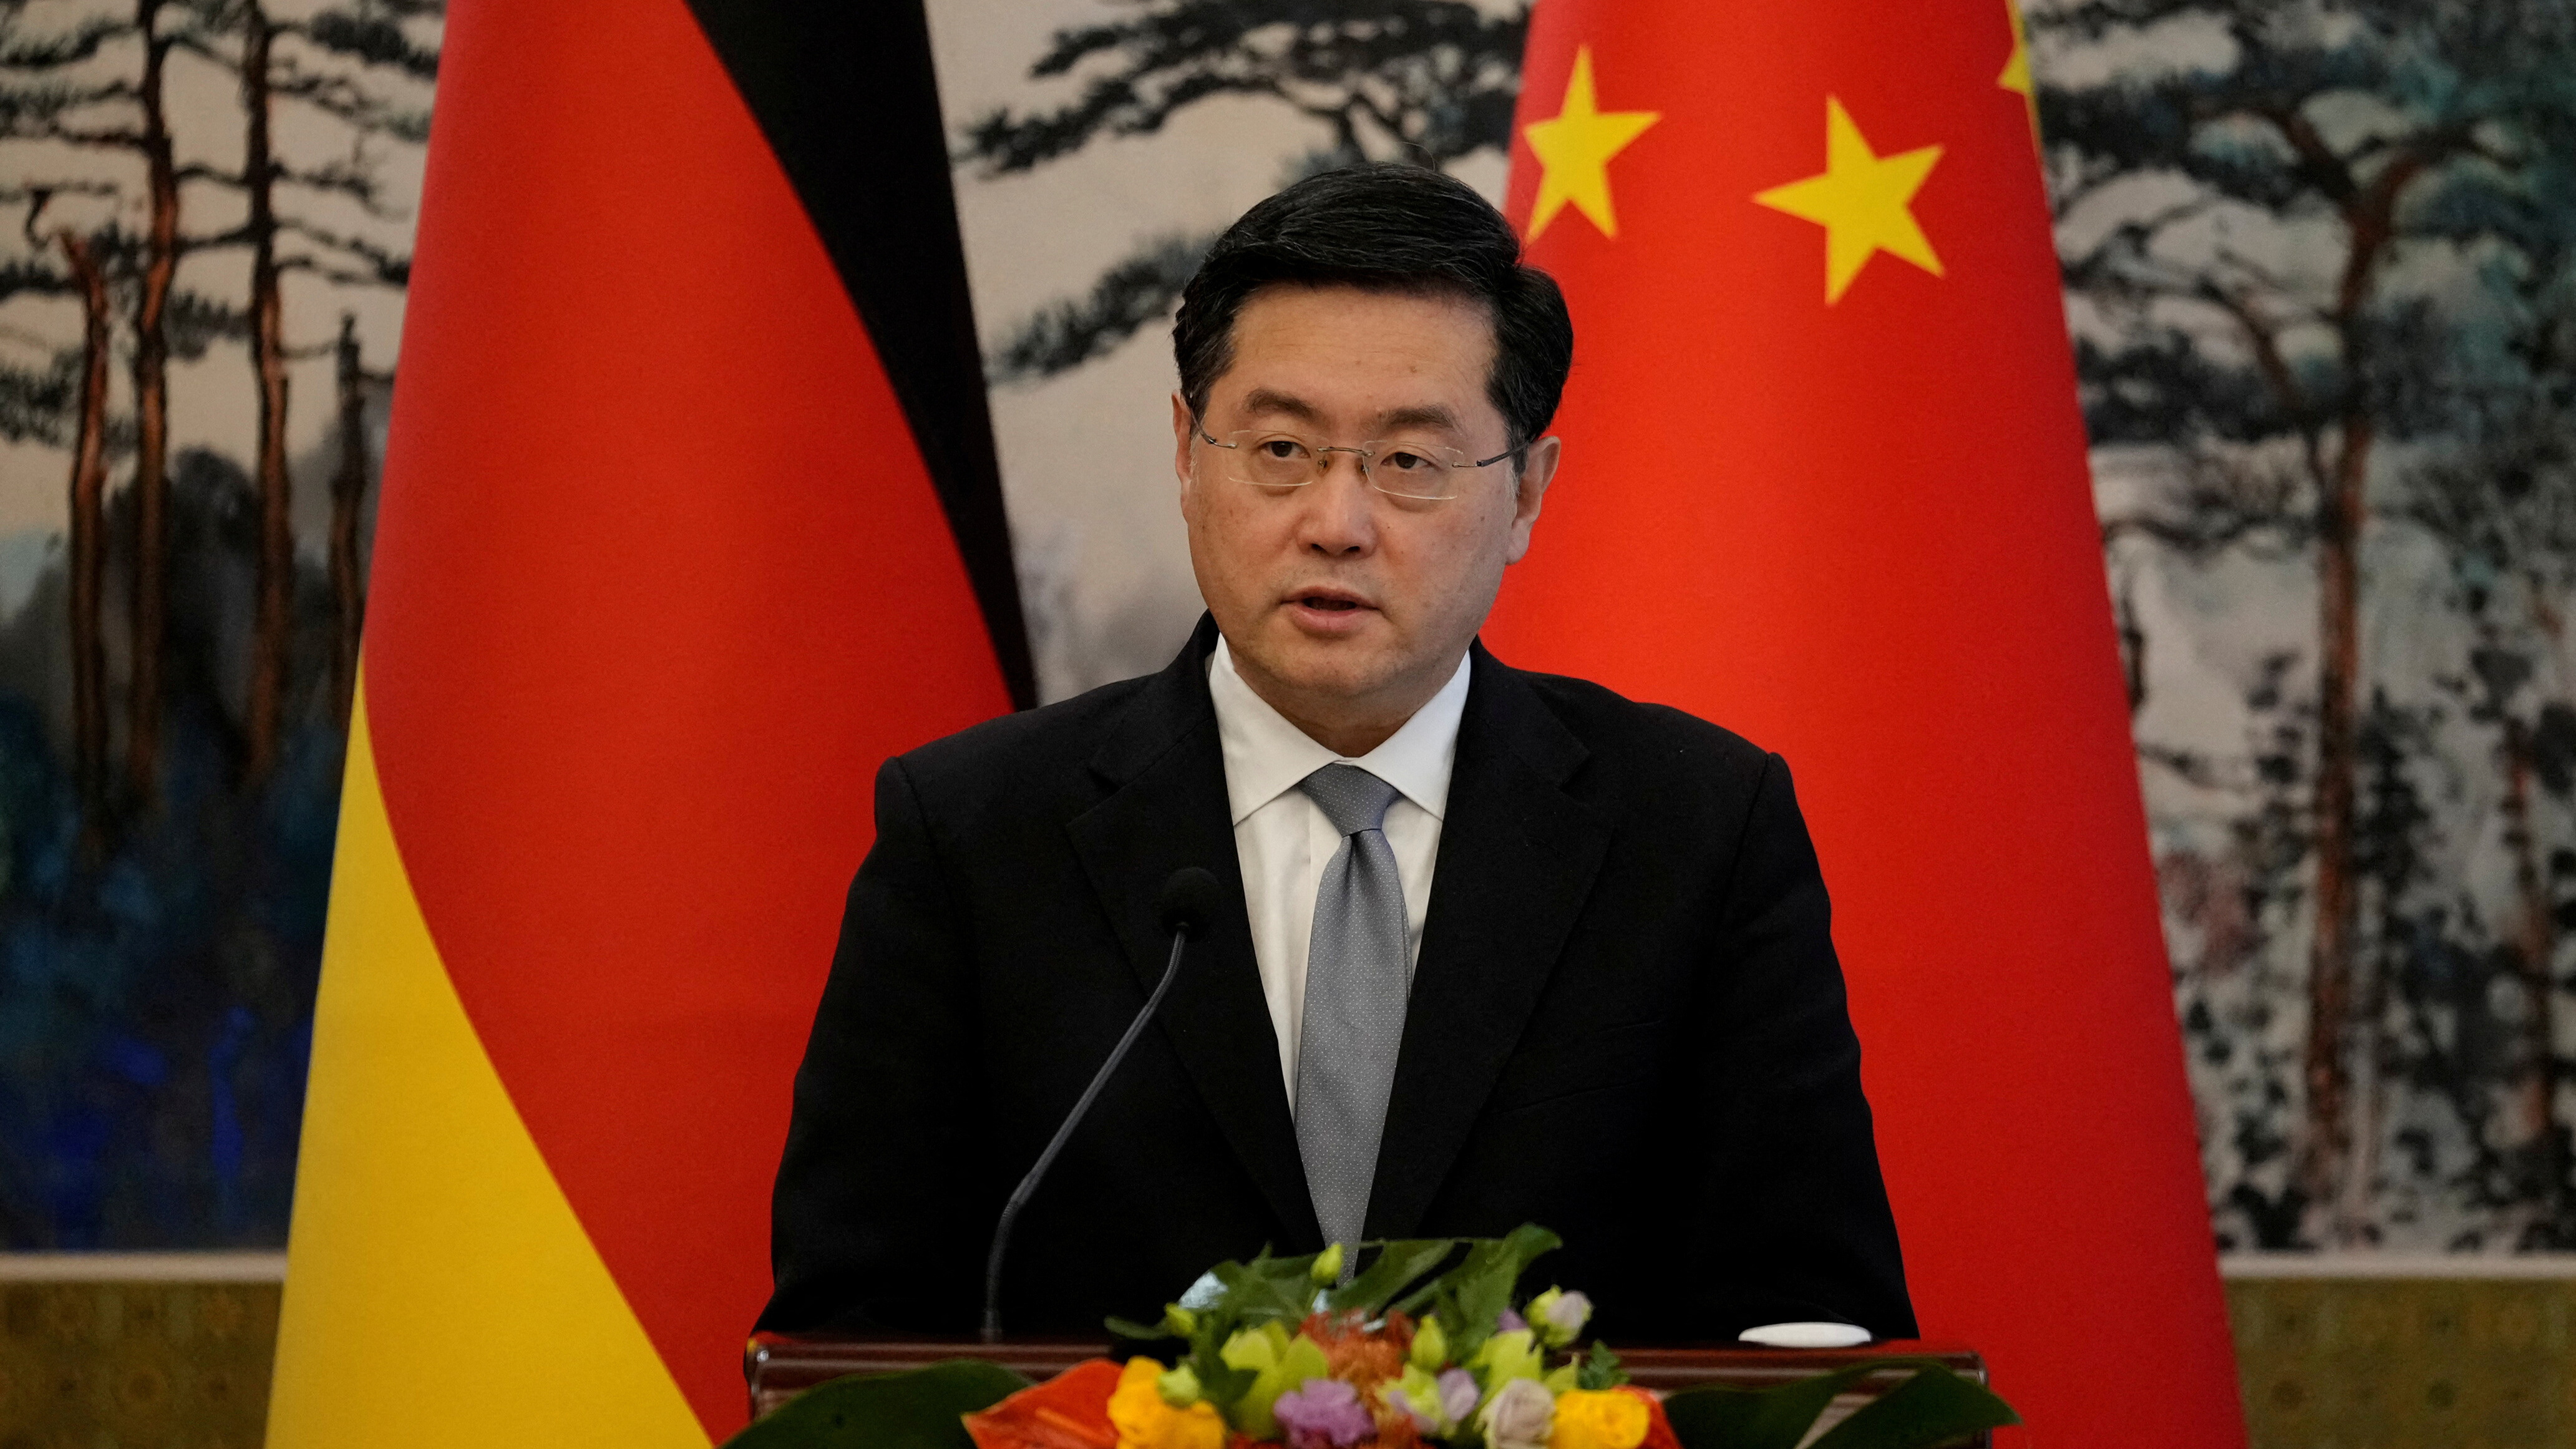 Qin Gang says China's economic relationship with Germany is mutually beneficially and has urged more trading cooperation between the two nations in the future./Suo Takekuma/Reuters.